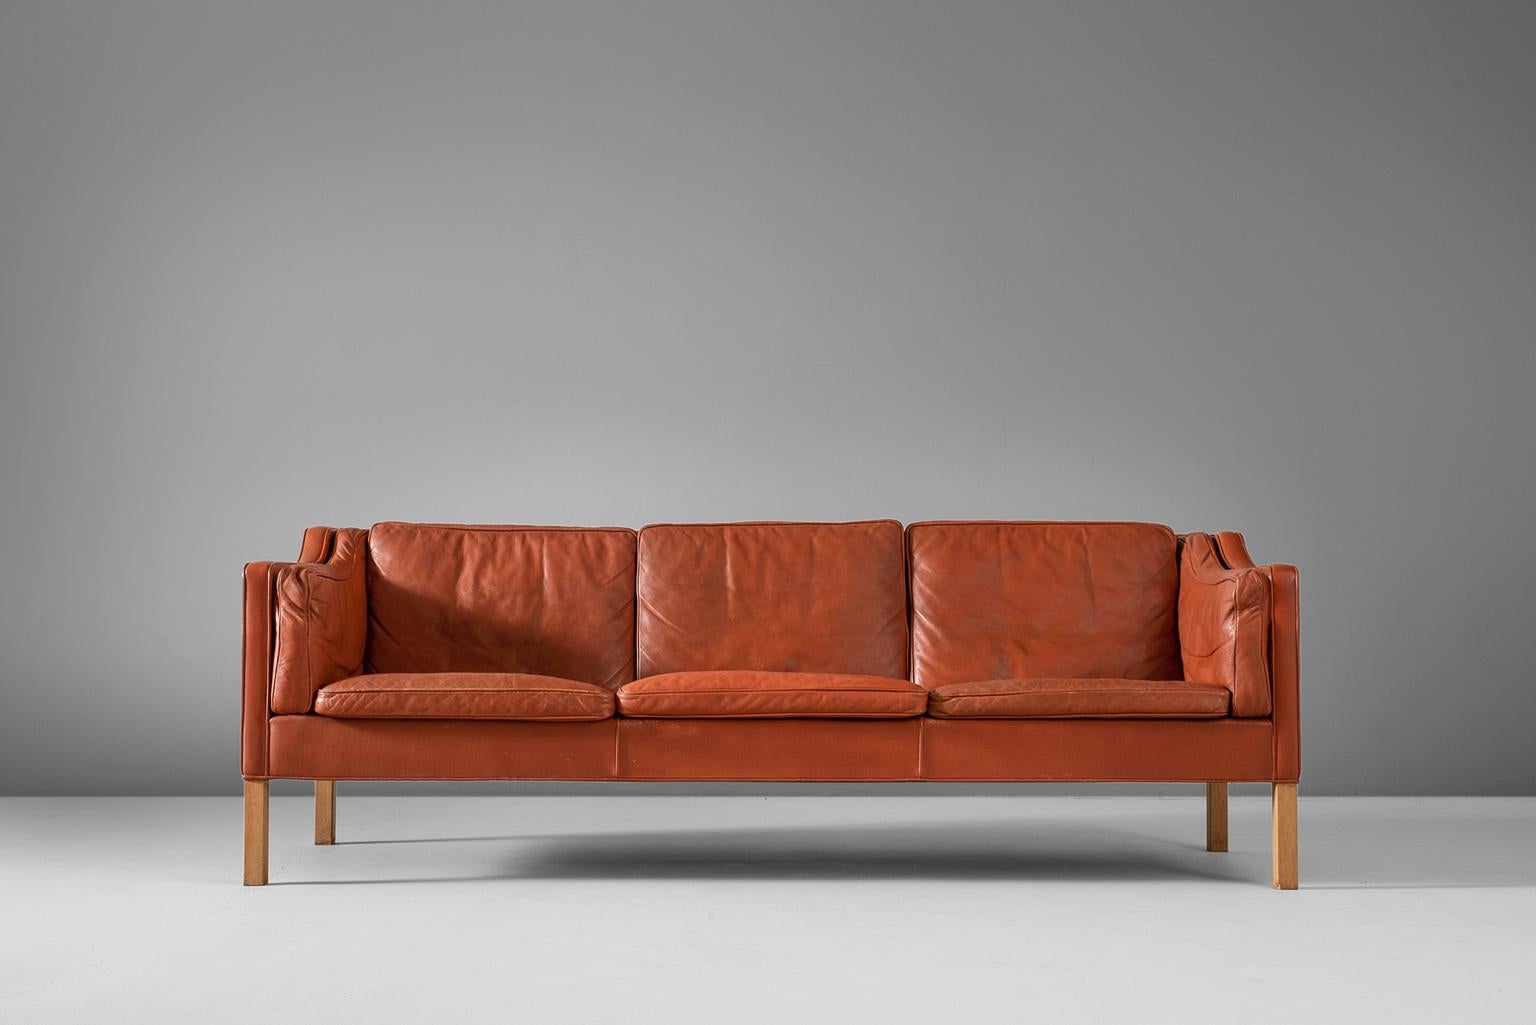 Børge Mogensen for Fredericia Stolefabrik, three-seat sofa BM2213, sienna red to cognac leather and oak, Denmark, 1962. 

Very well conditioned three-seat sofa from Børge Mogensen. This model was designed by Mogensen for his own home, in his goal